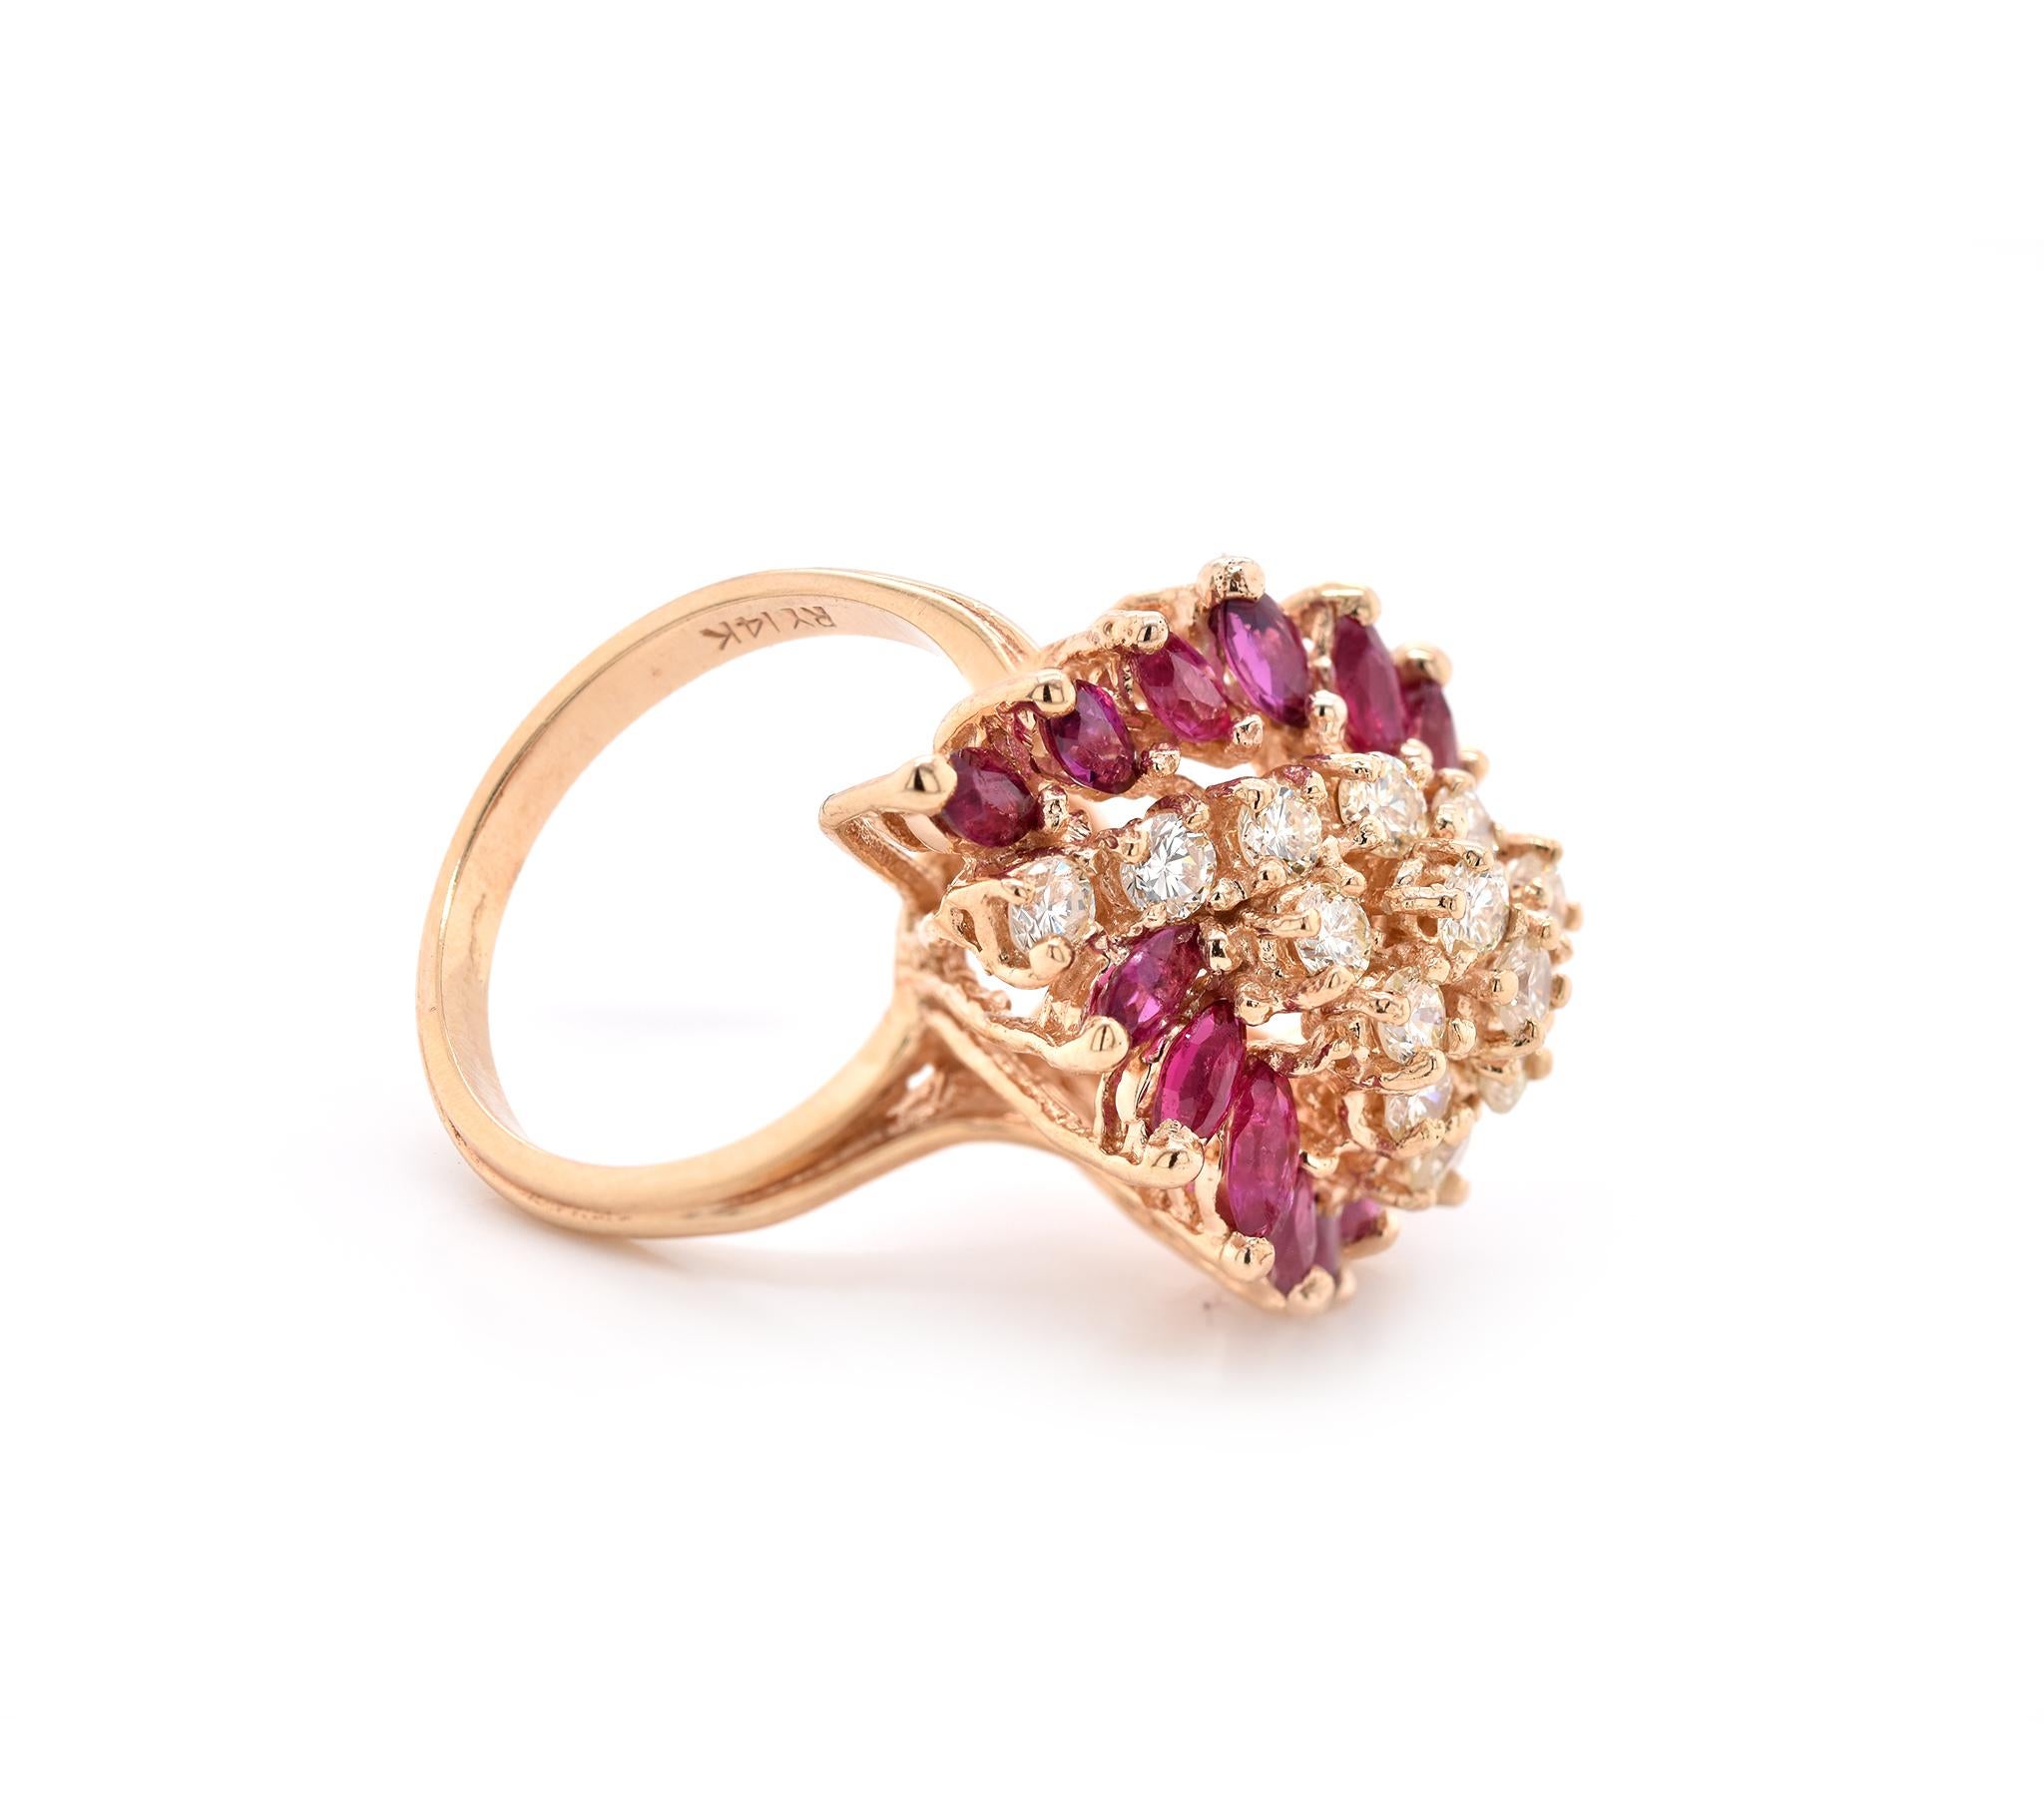 Designer: custom design
Material: 14k yellow gold
Gemstones: Ruby
Diamonds: 17 round brilliant cuts = 1.36cttw
Color: H-I
Clarity: VS2
Ring Size: 6 ¼ (please allow two additional shipping days for sizing requests)
Dimensions: ring top measures